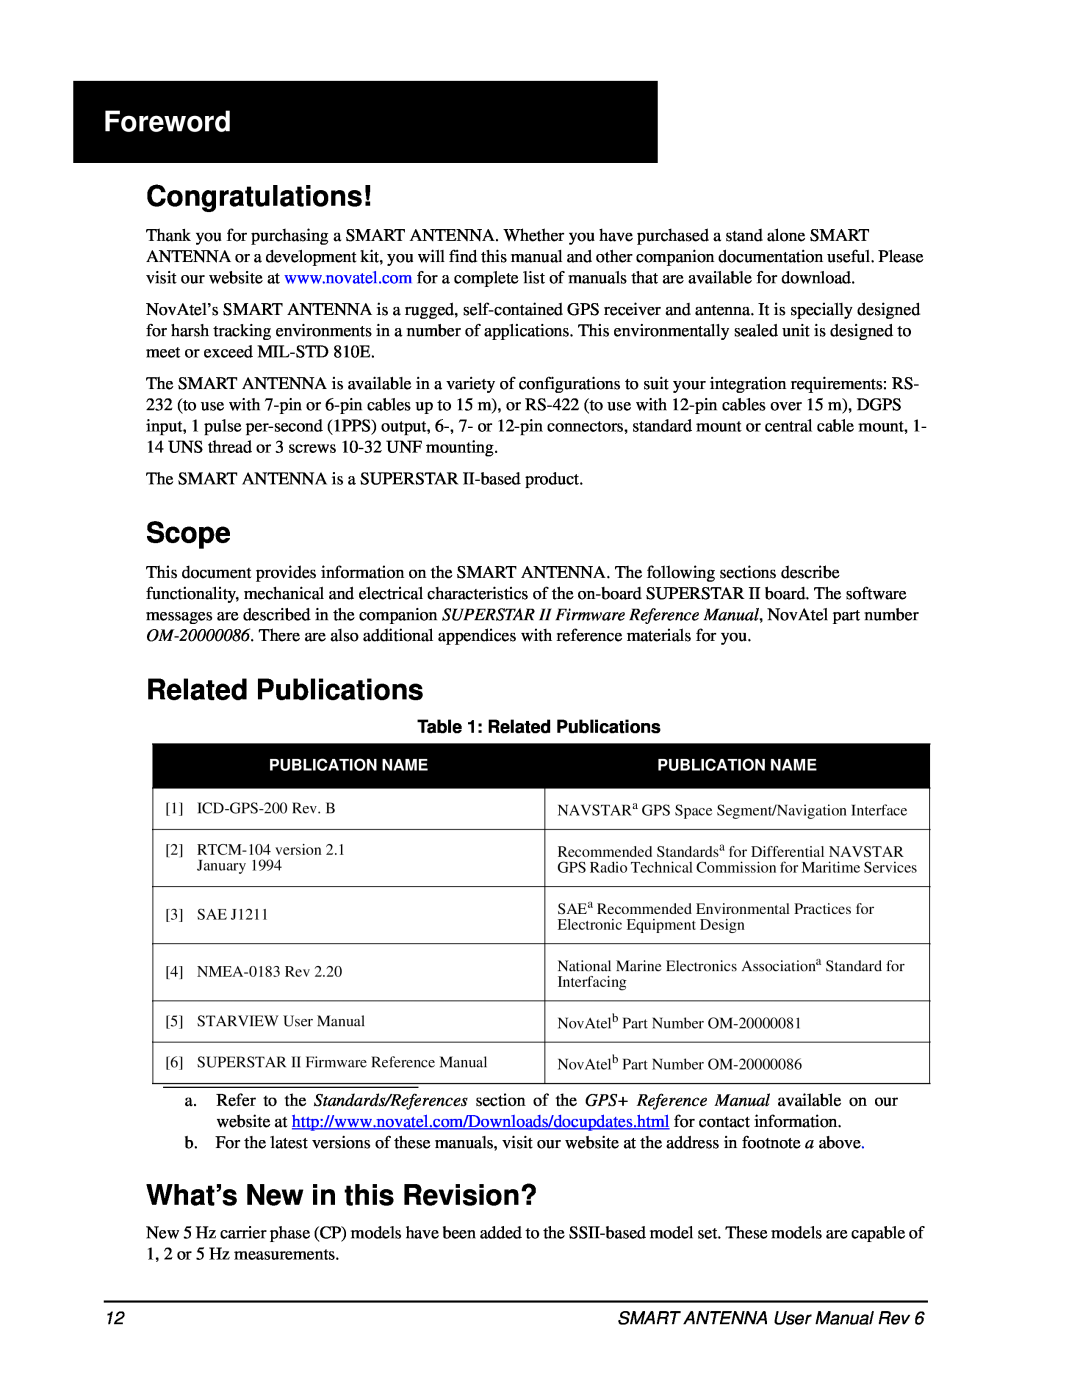 Novatel SMART ANTENNA user manual Foreword, Congratulations, Scope, Related Publications, What’s New in this Revision? 